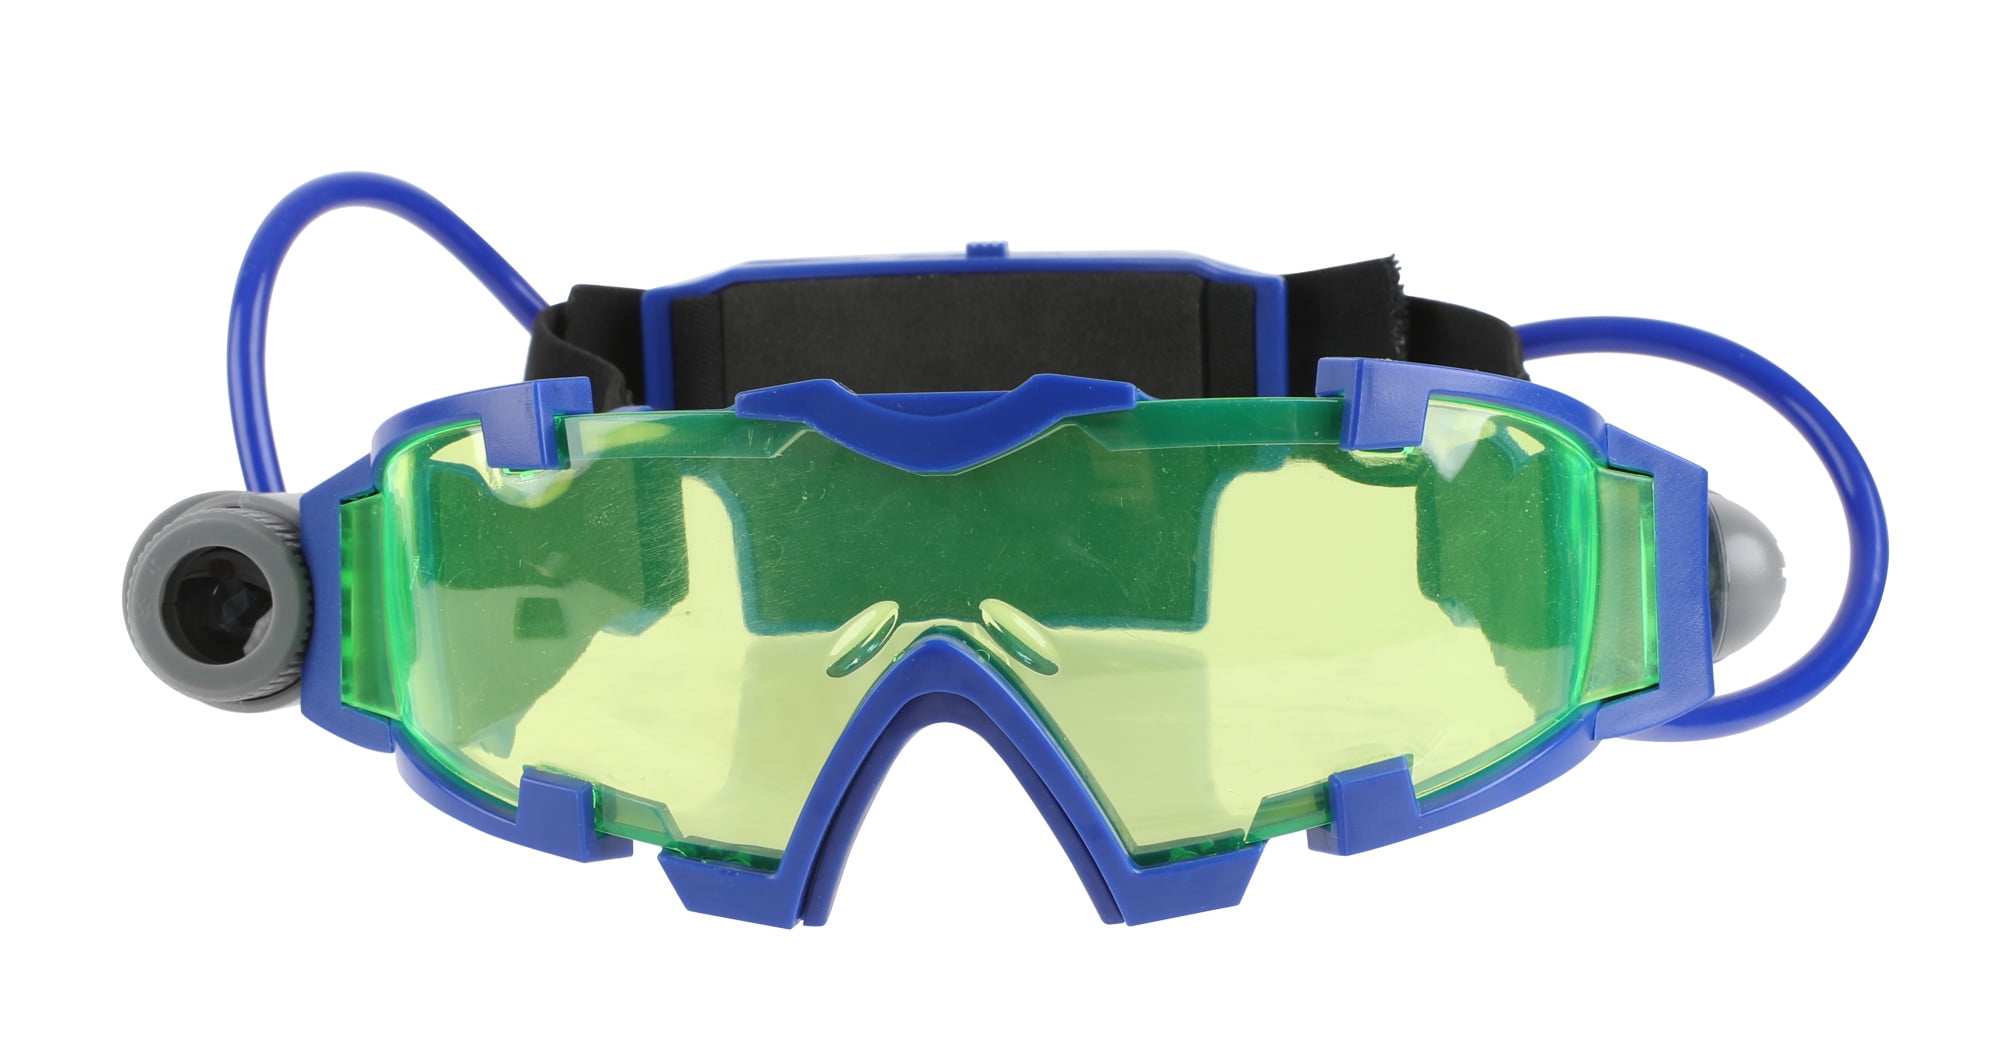 Brand New NERF Mask BATTLE GOGGLES To Be Worn With Blaster PROTECTION Blue